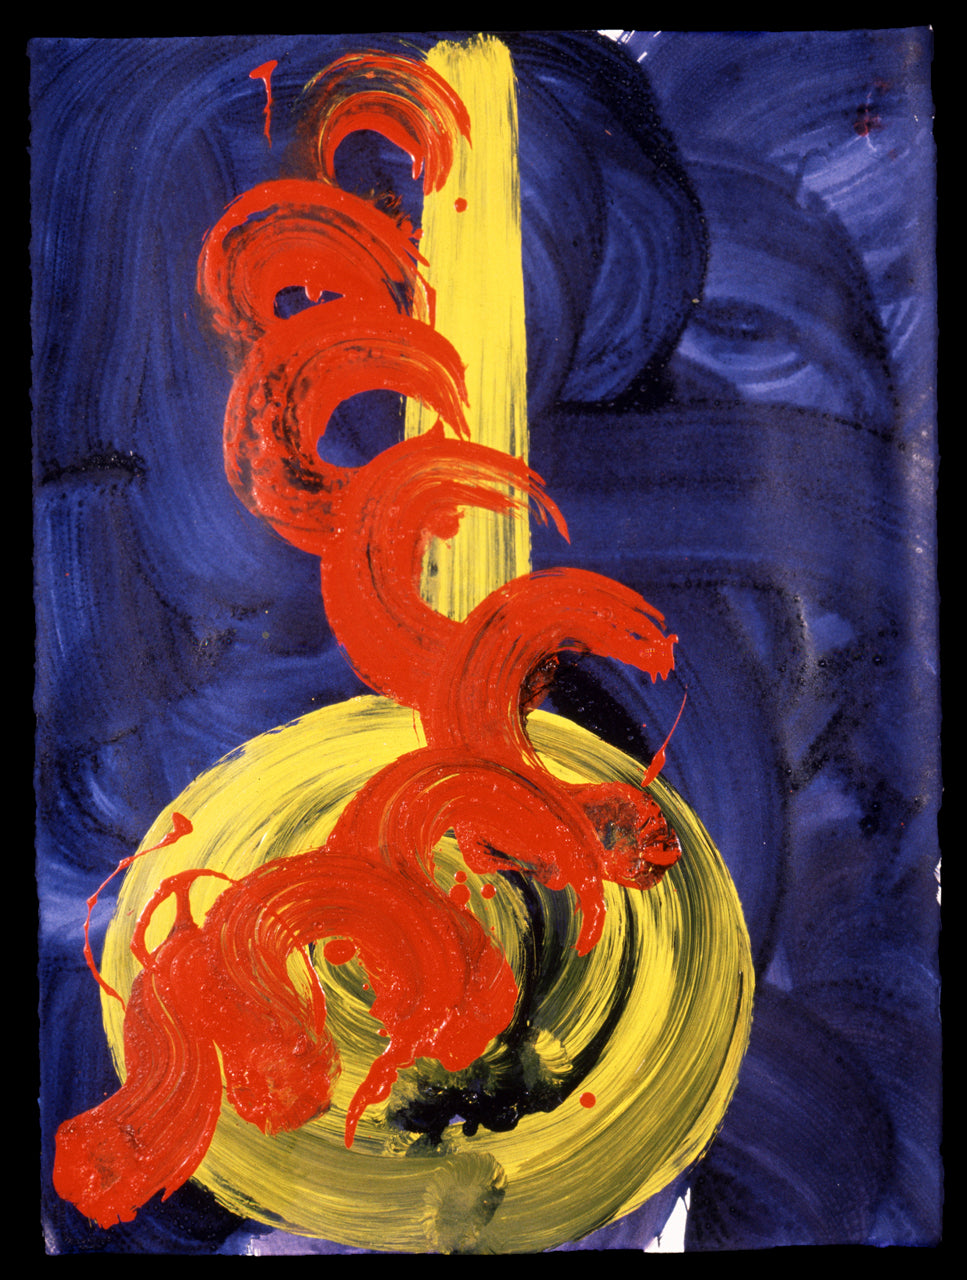 chihuly-tokyo-works-on-paper-23_a4bf24ec-558e-4dad-bddc-17f4d04a07c3.jpg